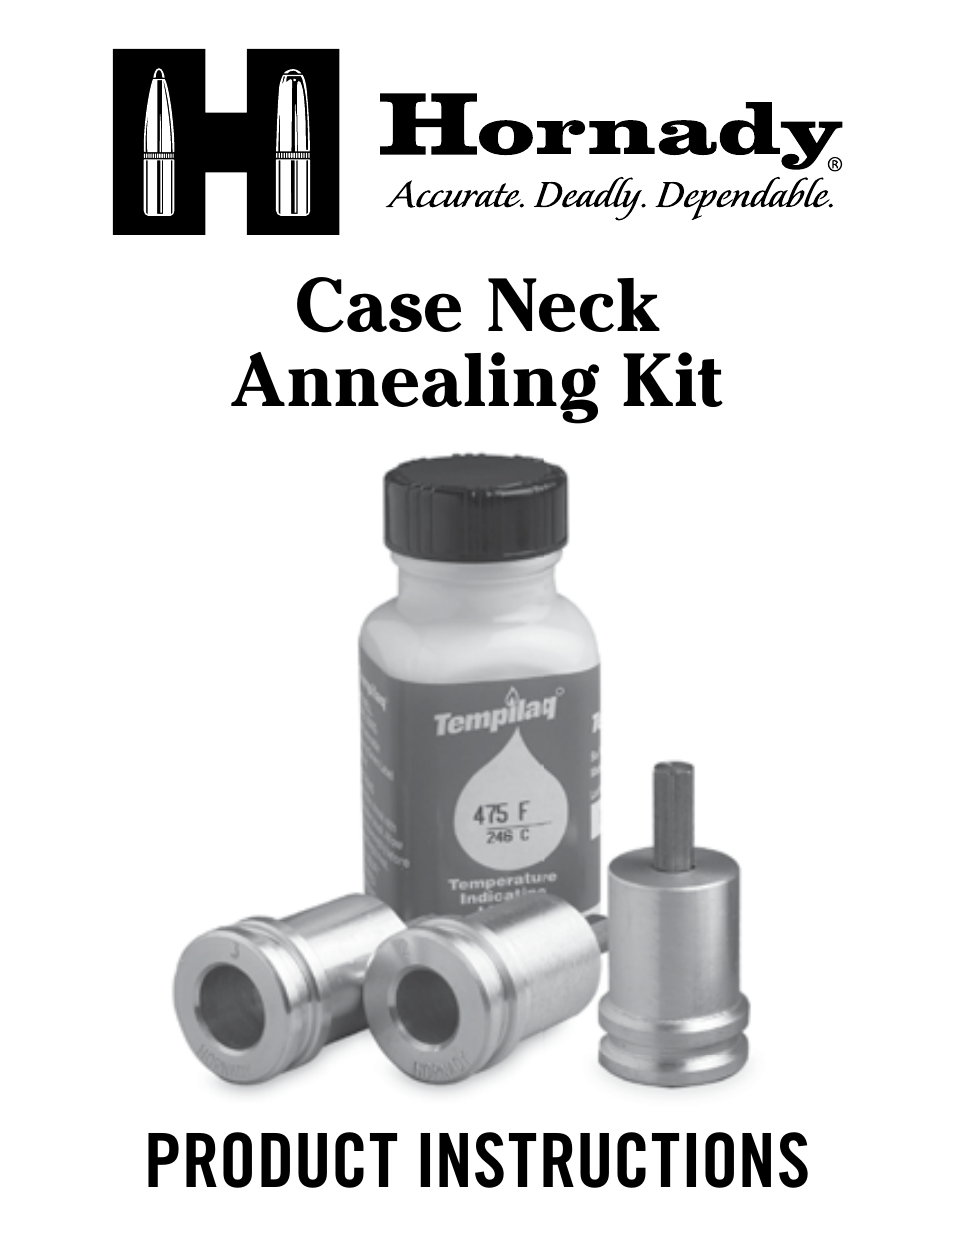 Hornady Annealing Kit User Manual | 8 pages